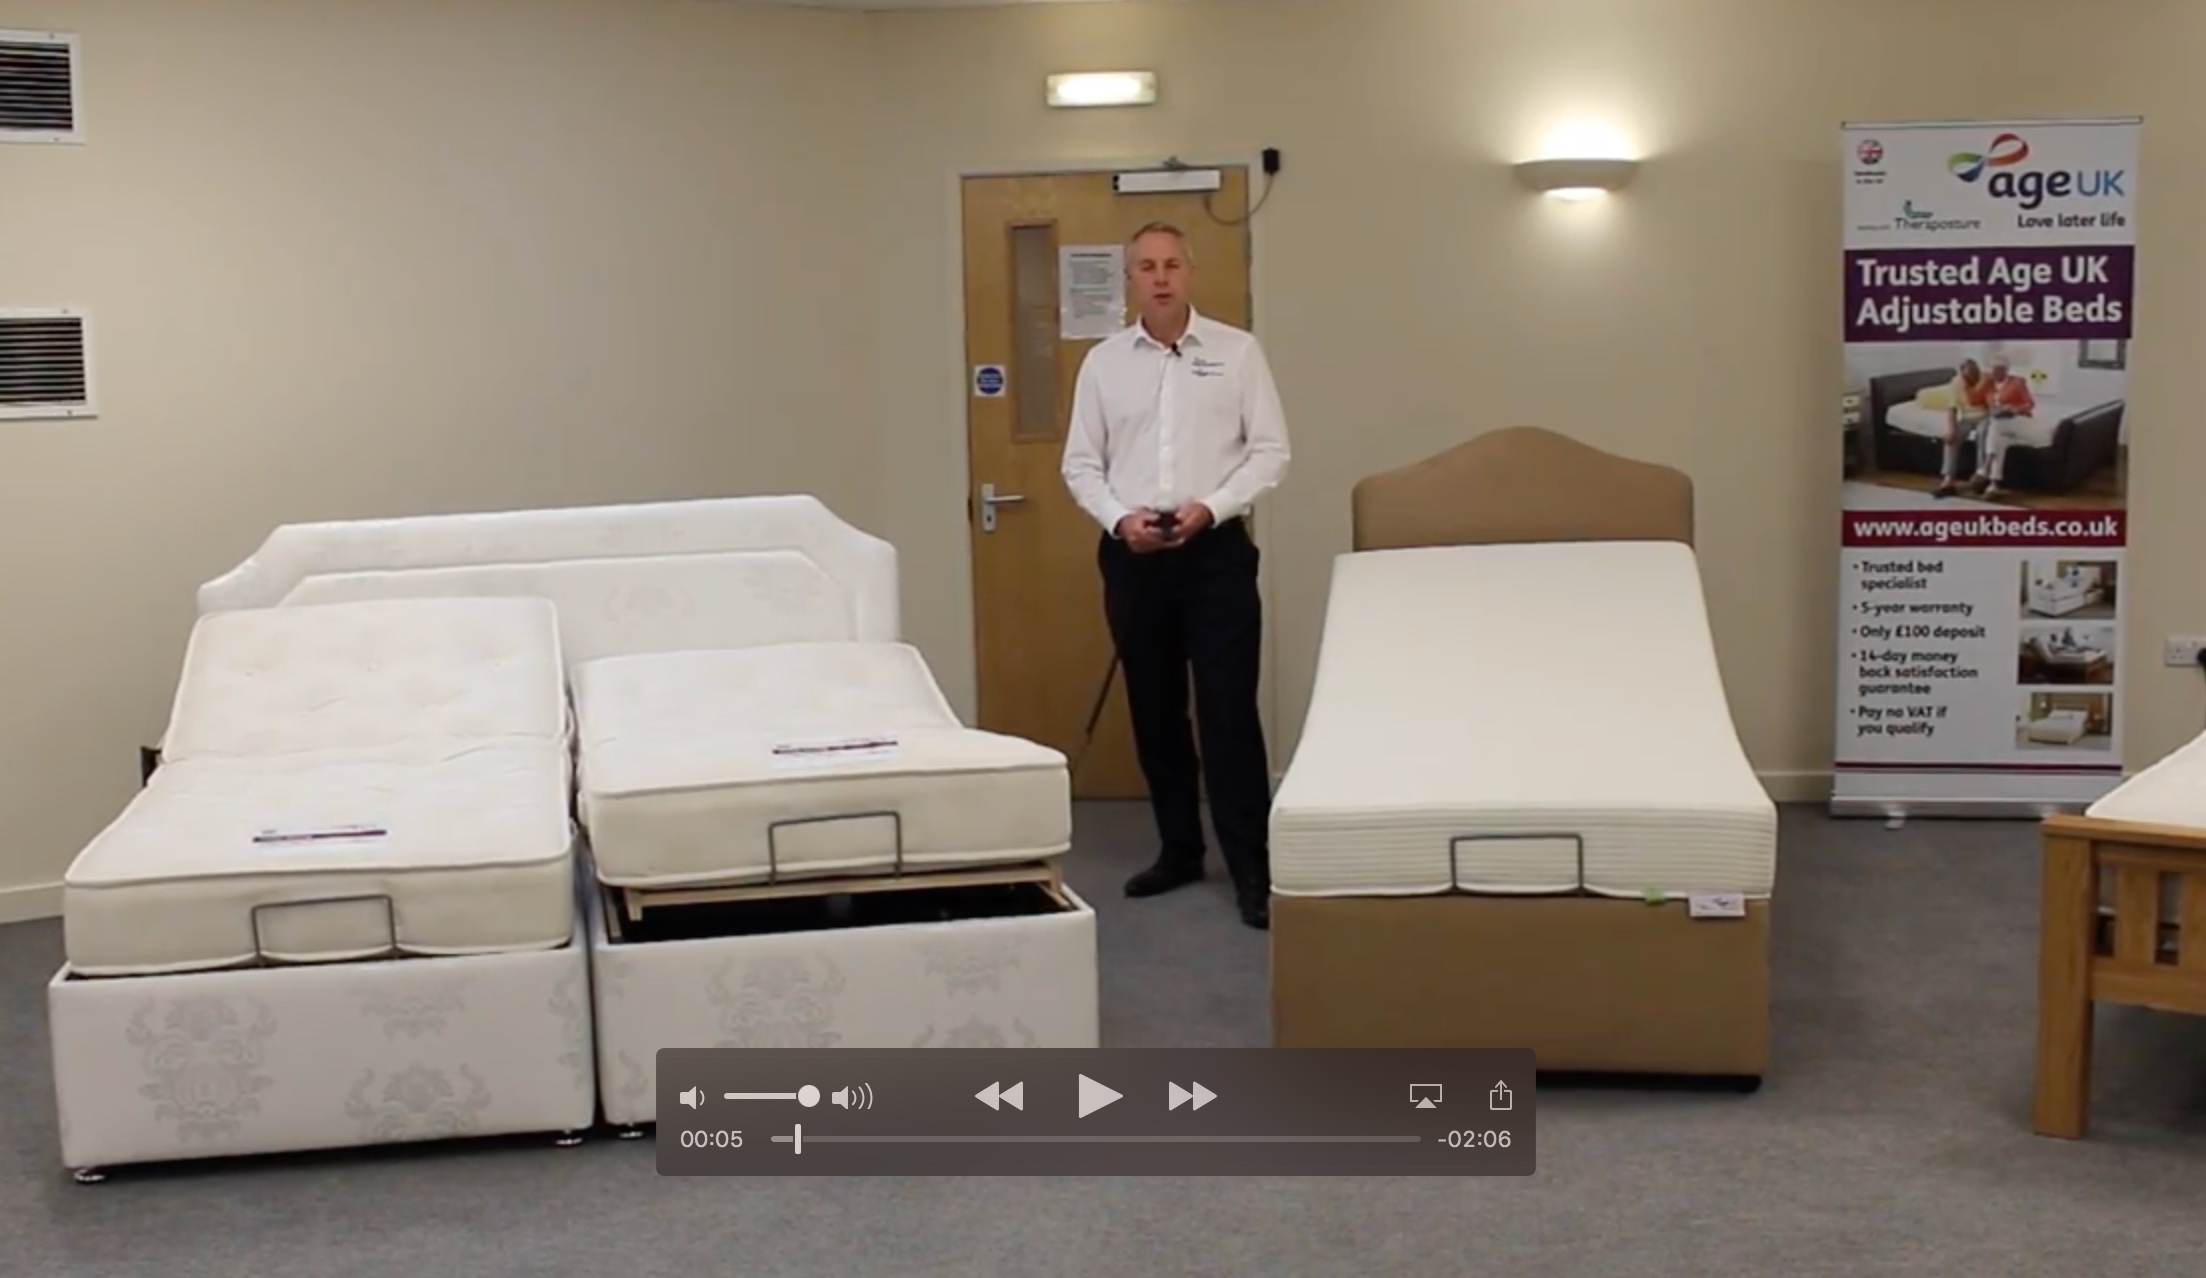 Age UK Adjustable Beds from Theraposture - introducing the range